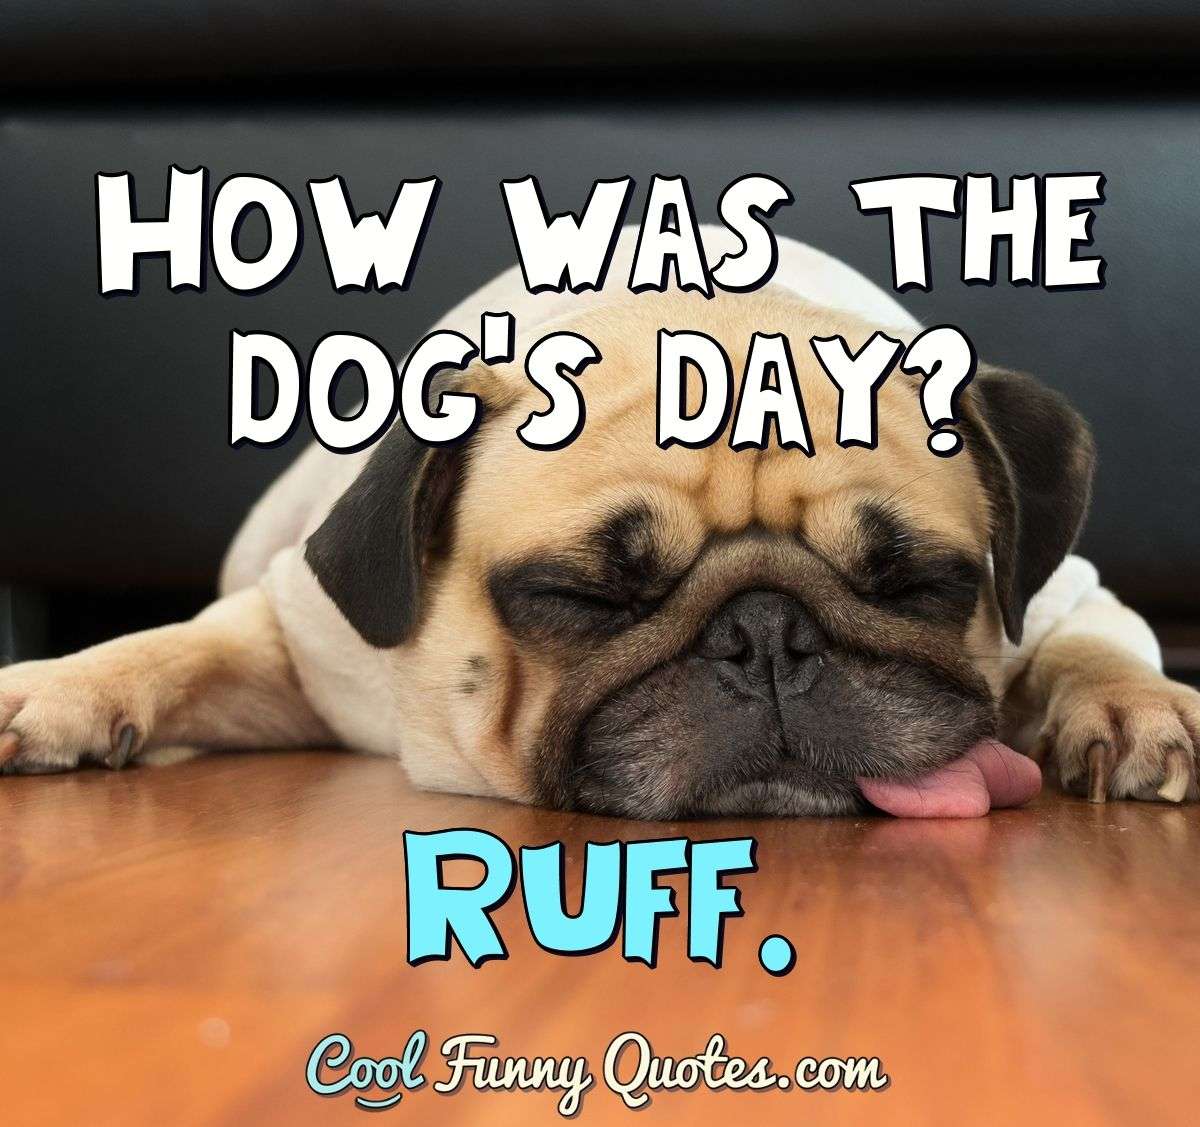 How was the dog's day? Ruff.